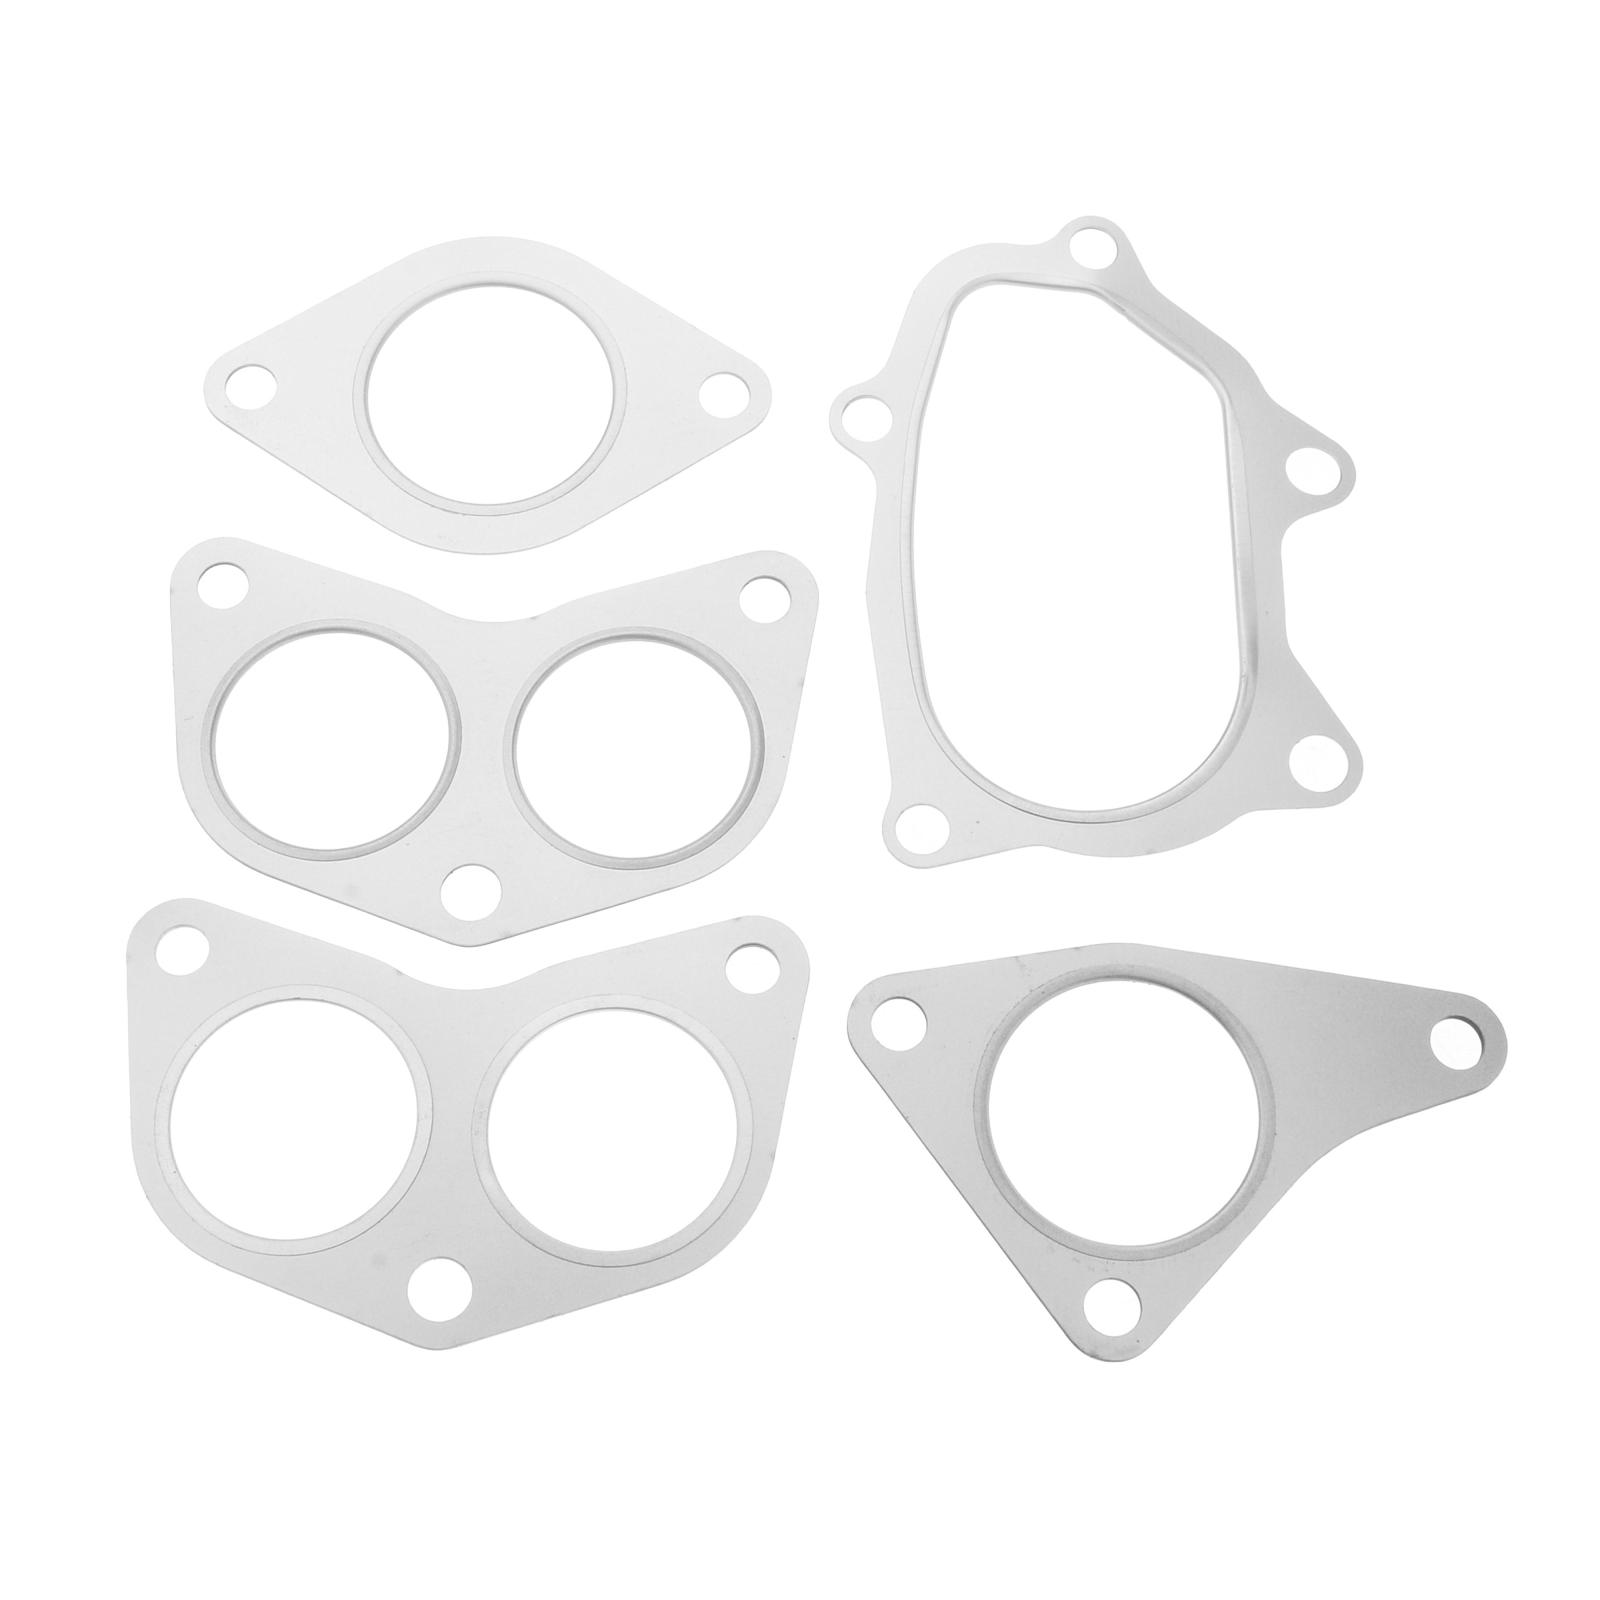 Exhaust Manifold Gasket Kit for Motors EJ20G EJ205 14038AA000 Replace Acc